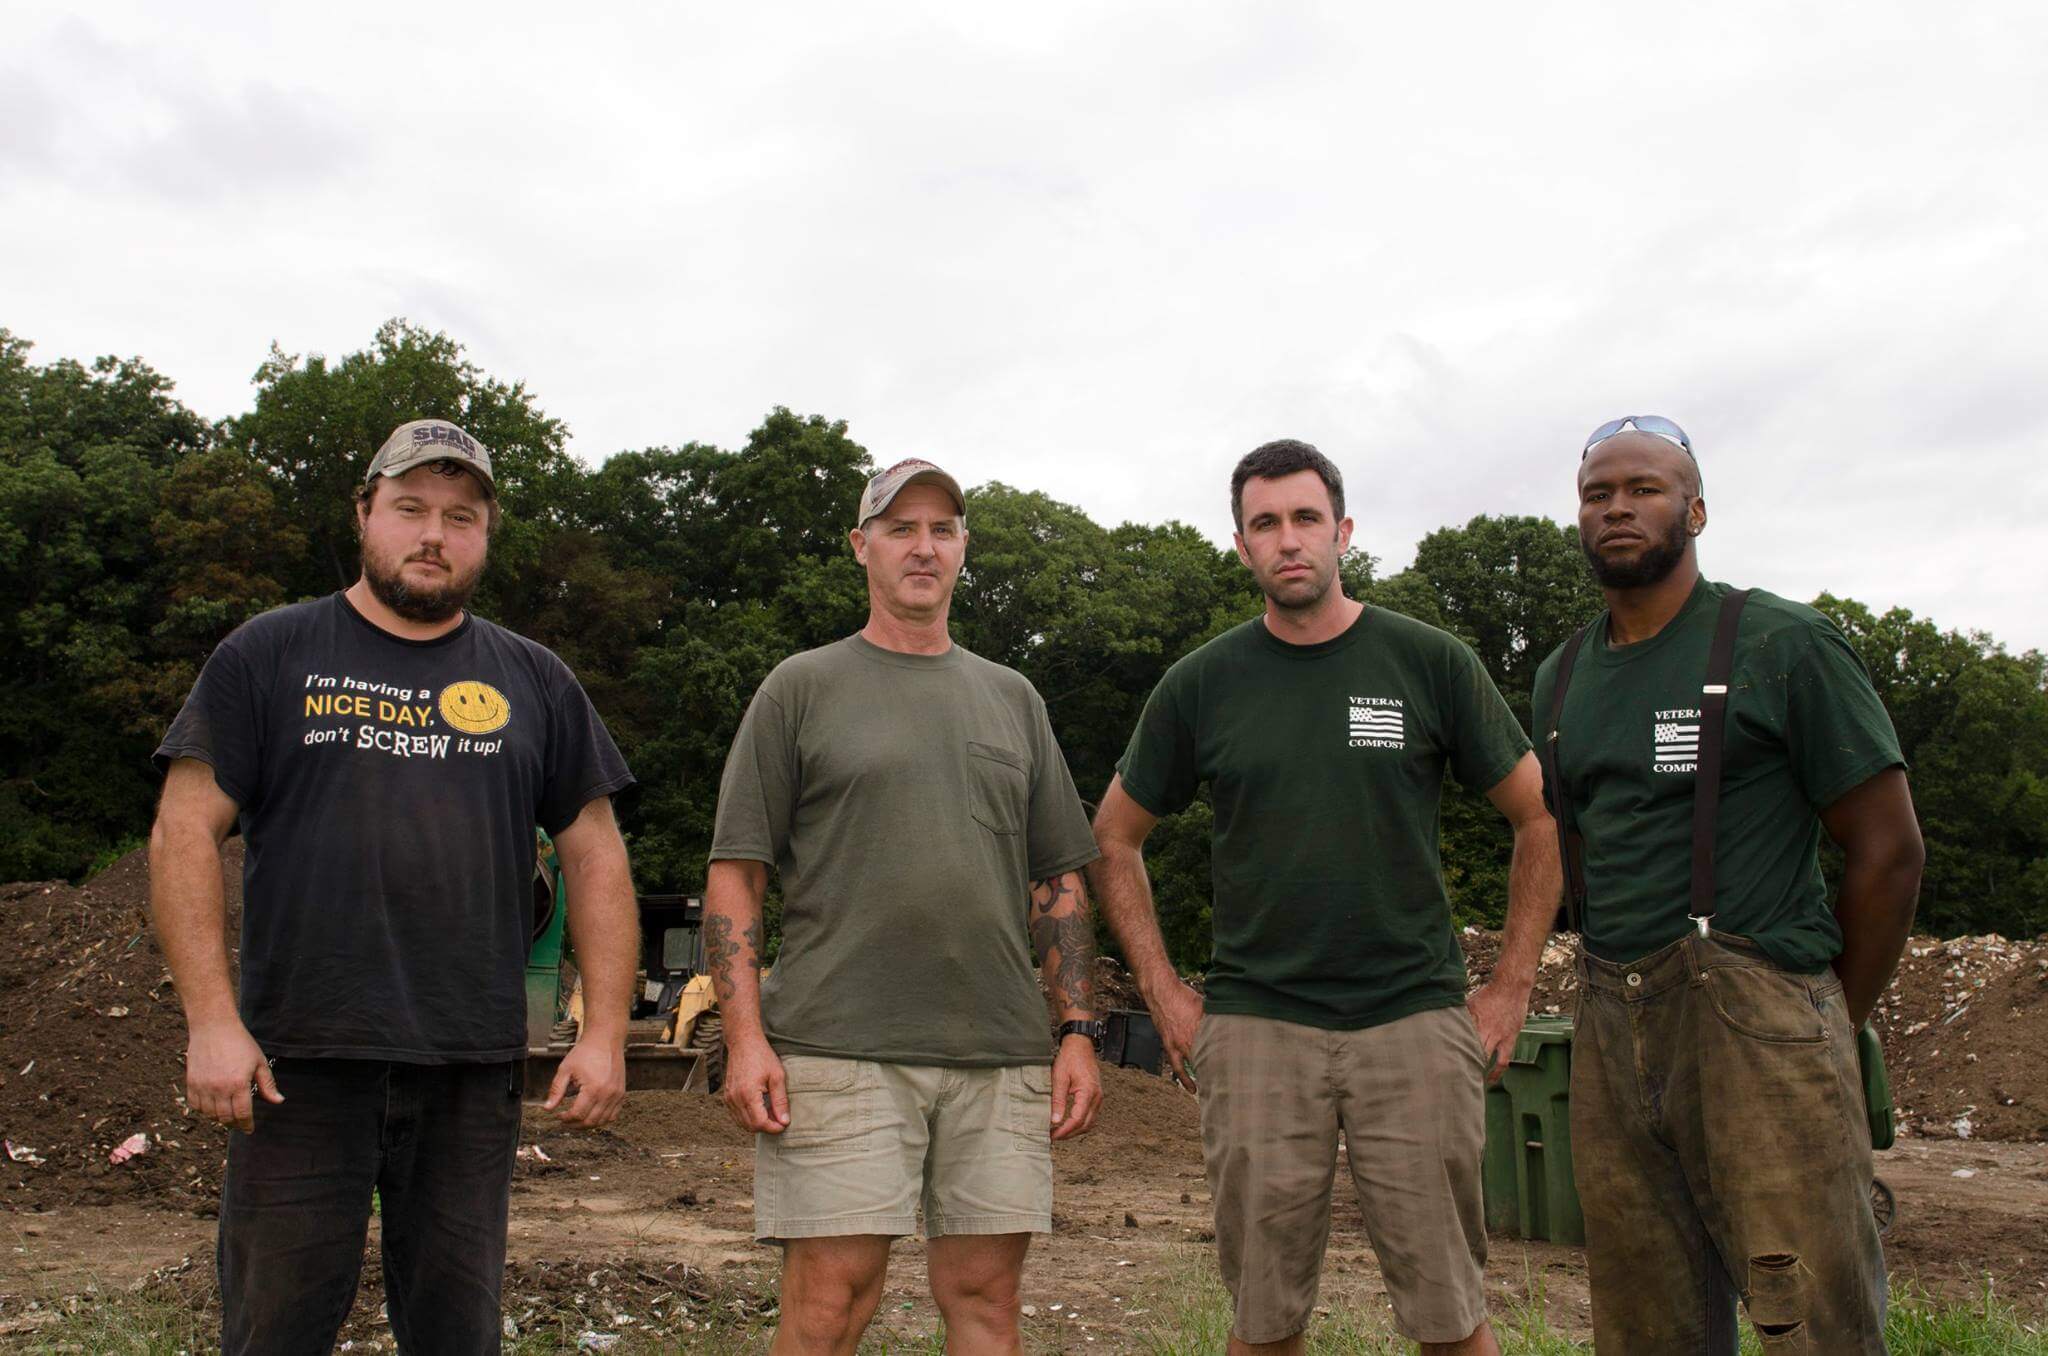 The Veteran Compost team is focused on employing veterans and their family members, and turning food scraps into high-quality compost.